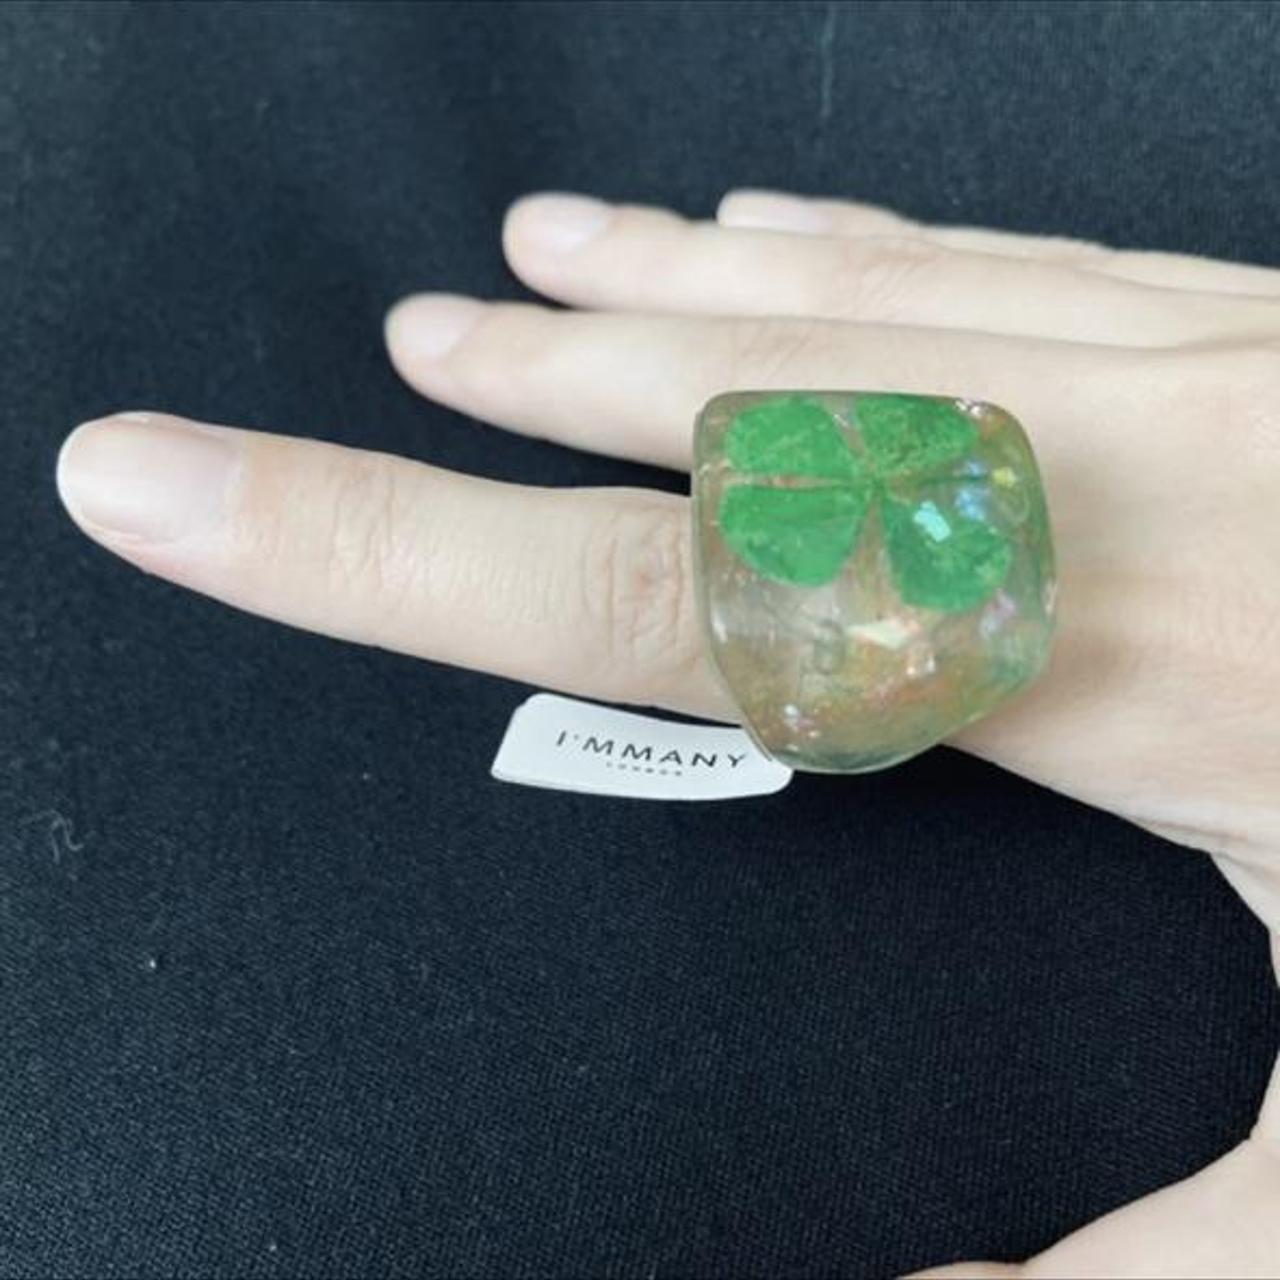 Product Image 3 - I'MMANY Clover Ring NWT

Inspired by